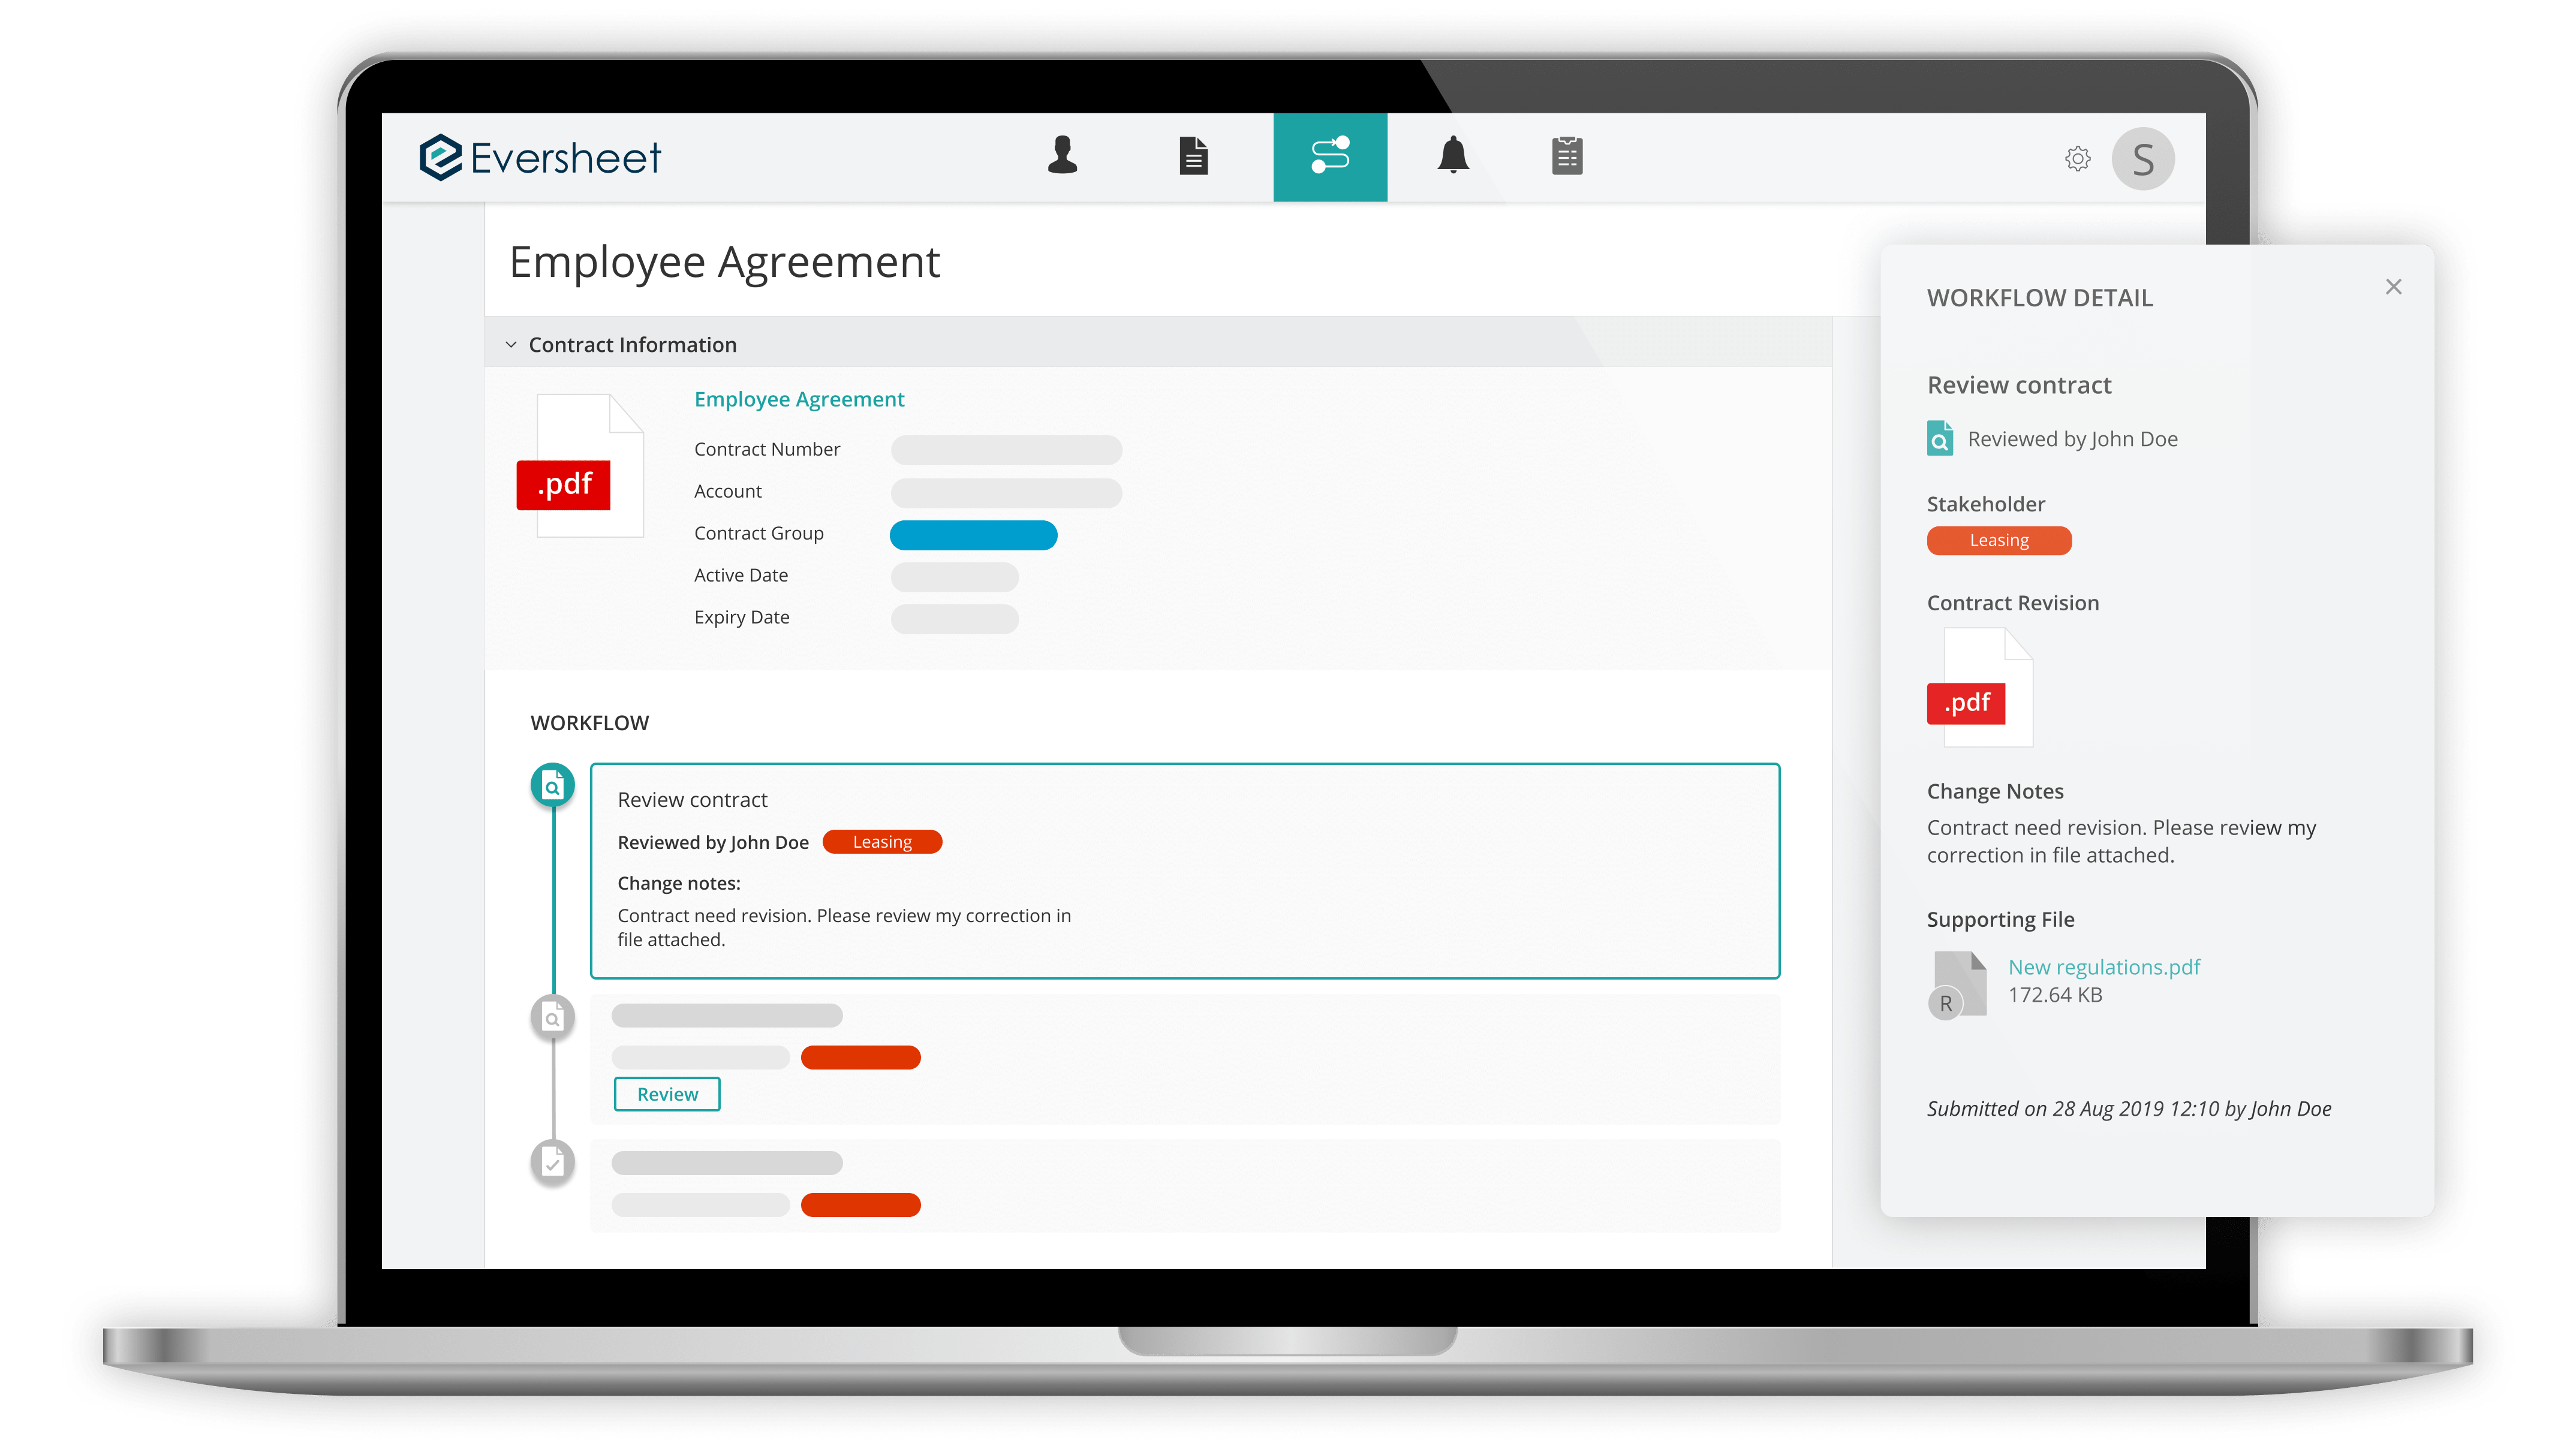 Manage your workflow